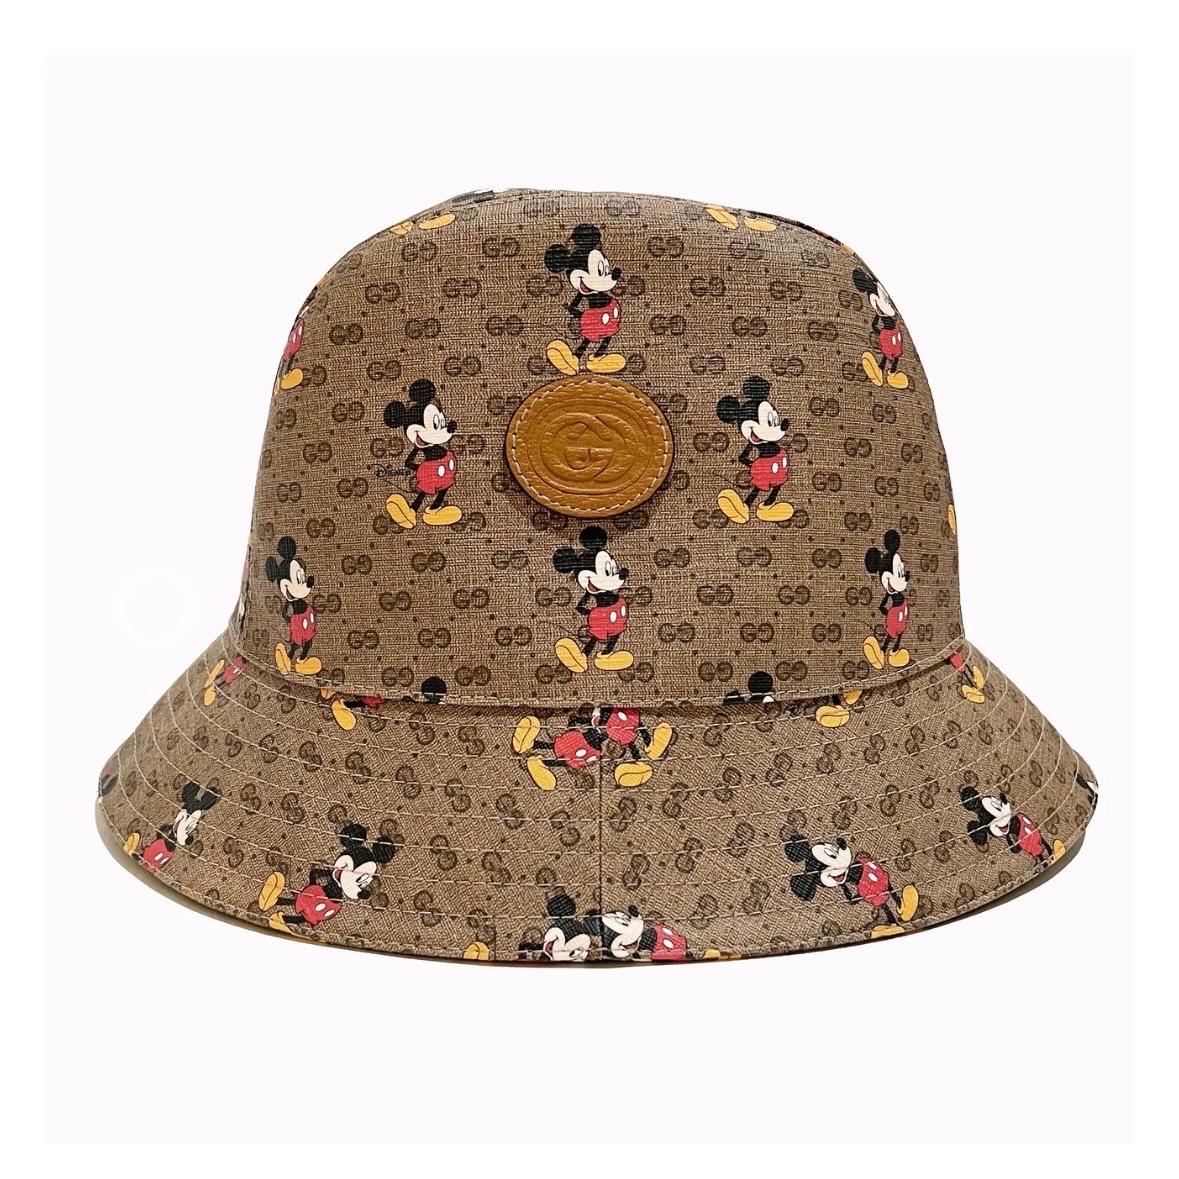 Mickey Monogram Bucket Hat by Disney X Gucci
Spring/Summer 2020
Made in Italy
Brown with vintage Gucci monogram throughout 
Mickey Mouse graphic intermixed throughout 
Interlocking G Gucci logo stamped on leather patch 
Fabric Composition; 50%